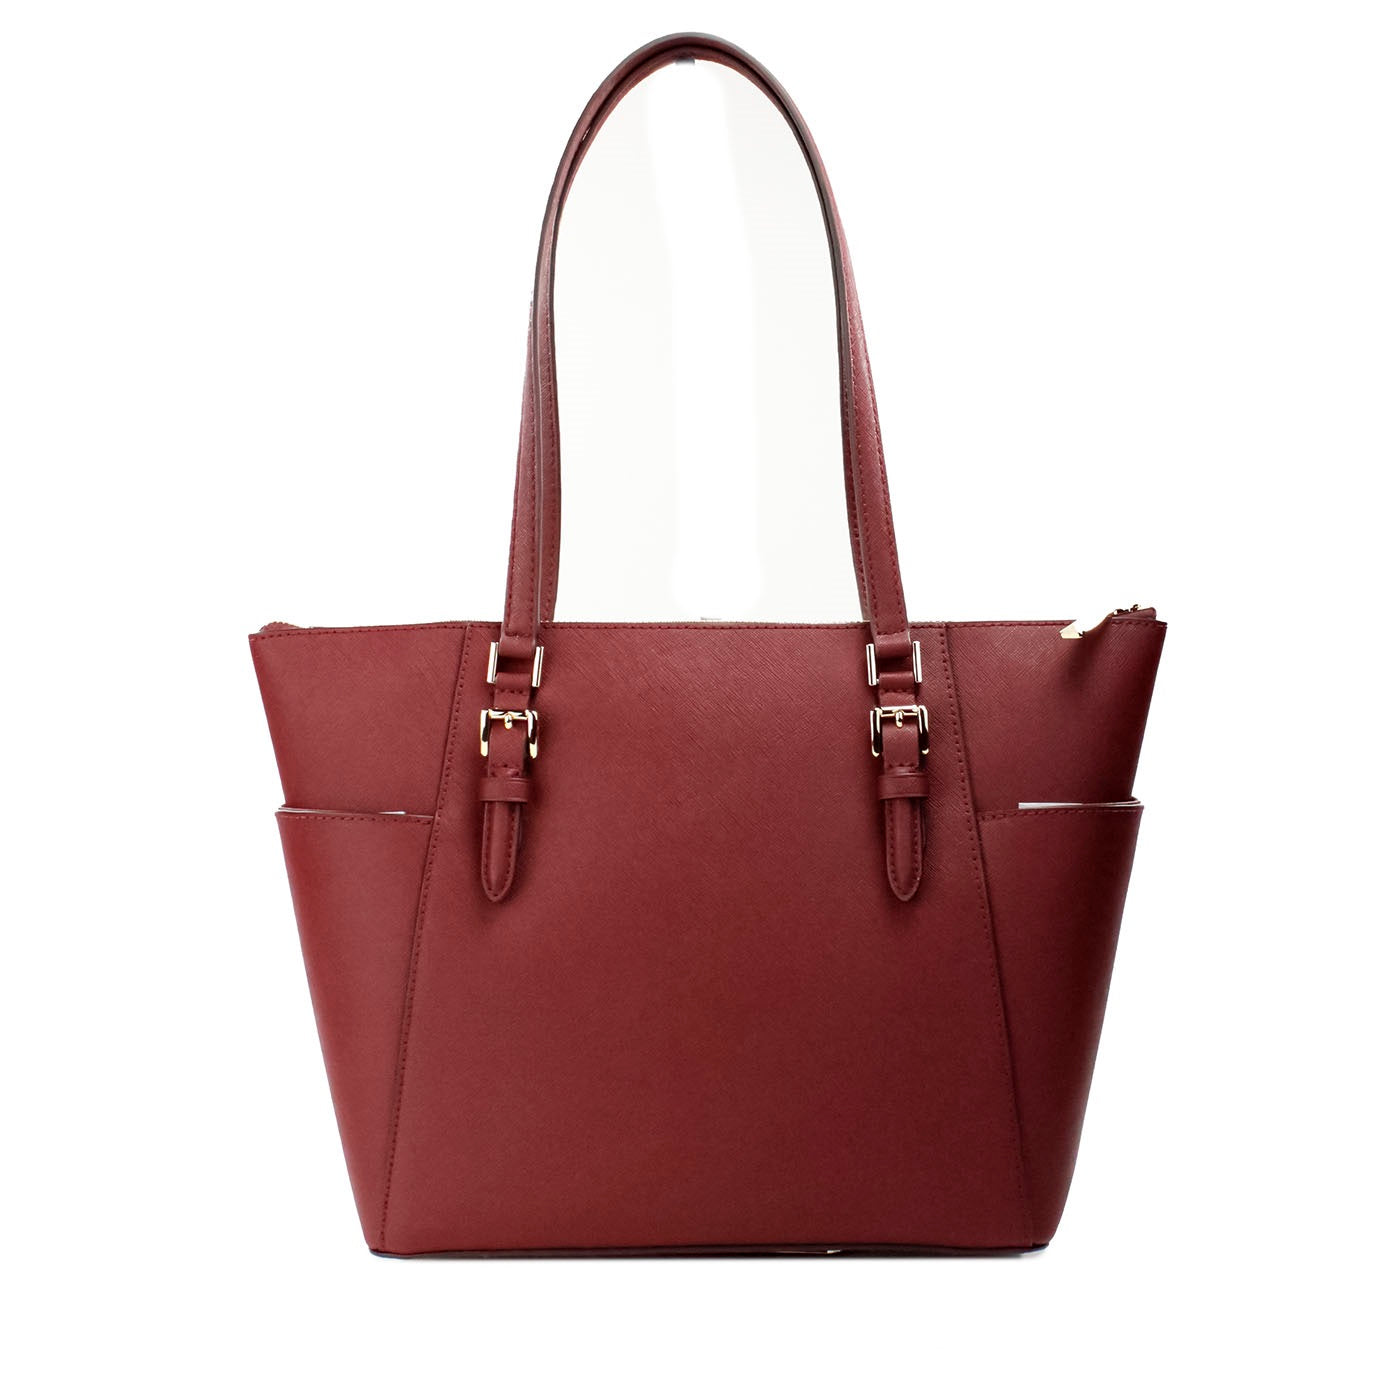 Charlotte Dark Cherry Large Leather Top Zip Tote Bag Purse